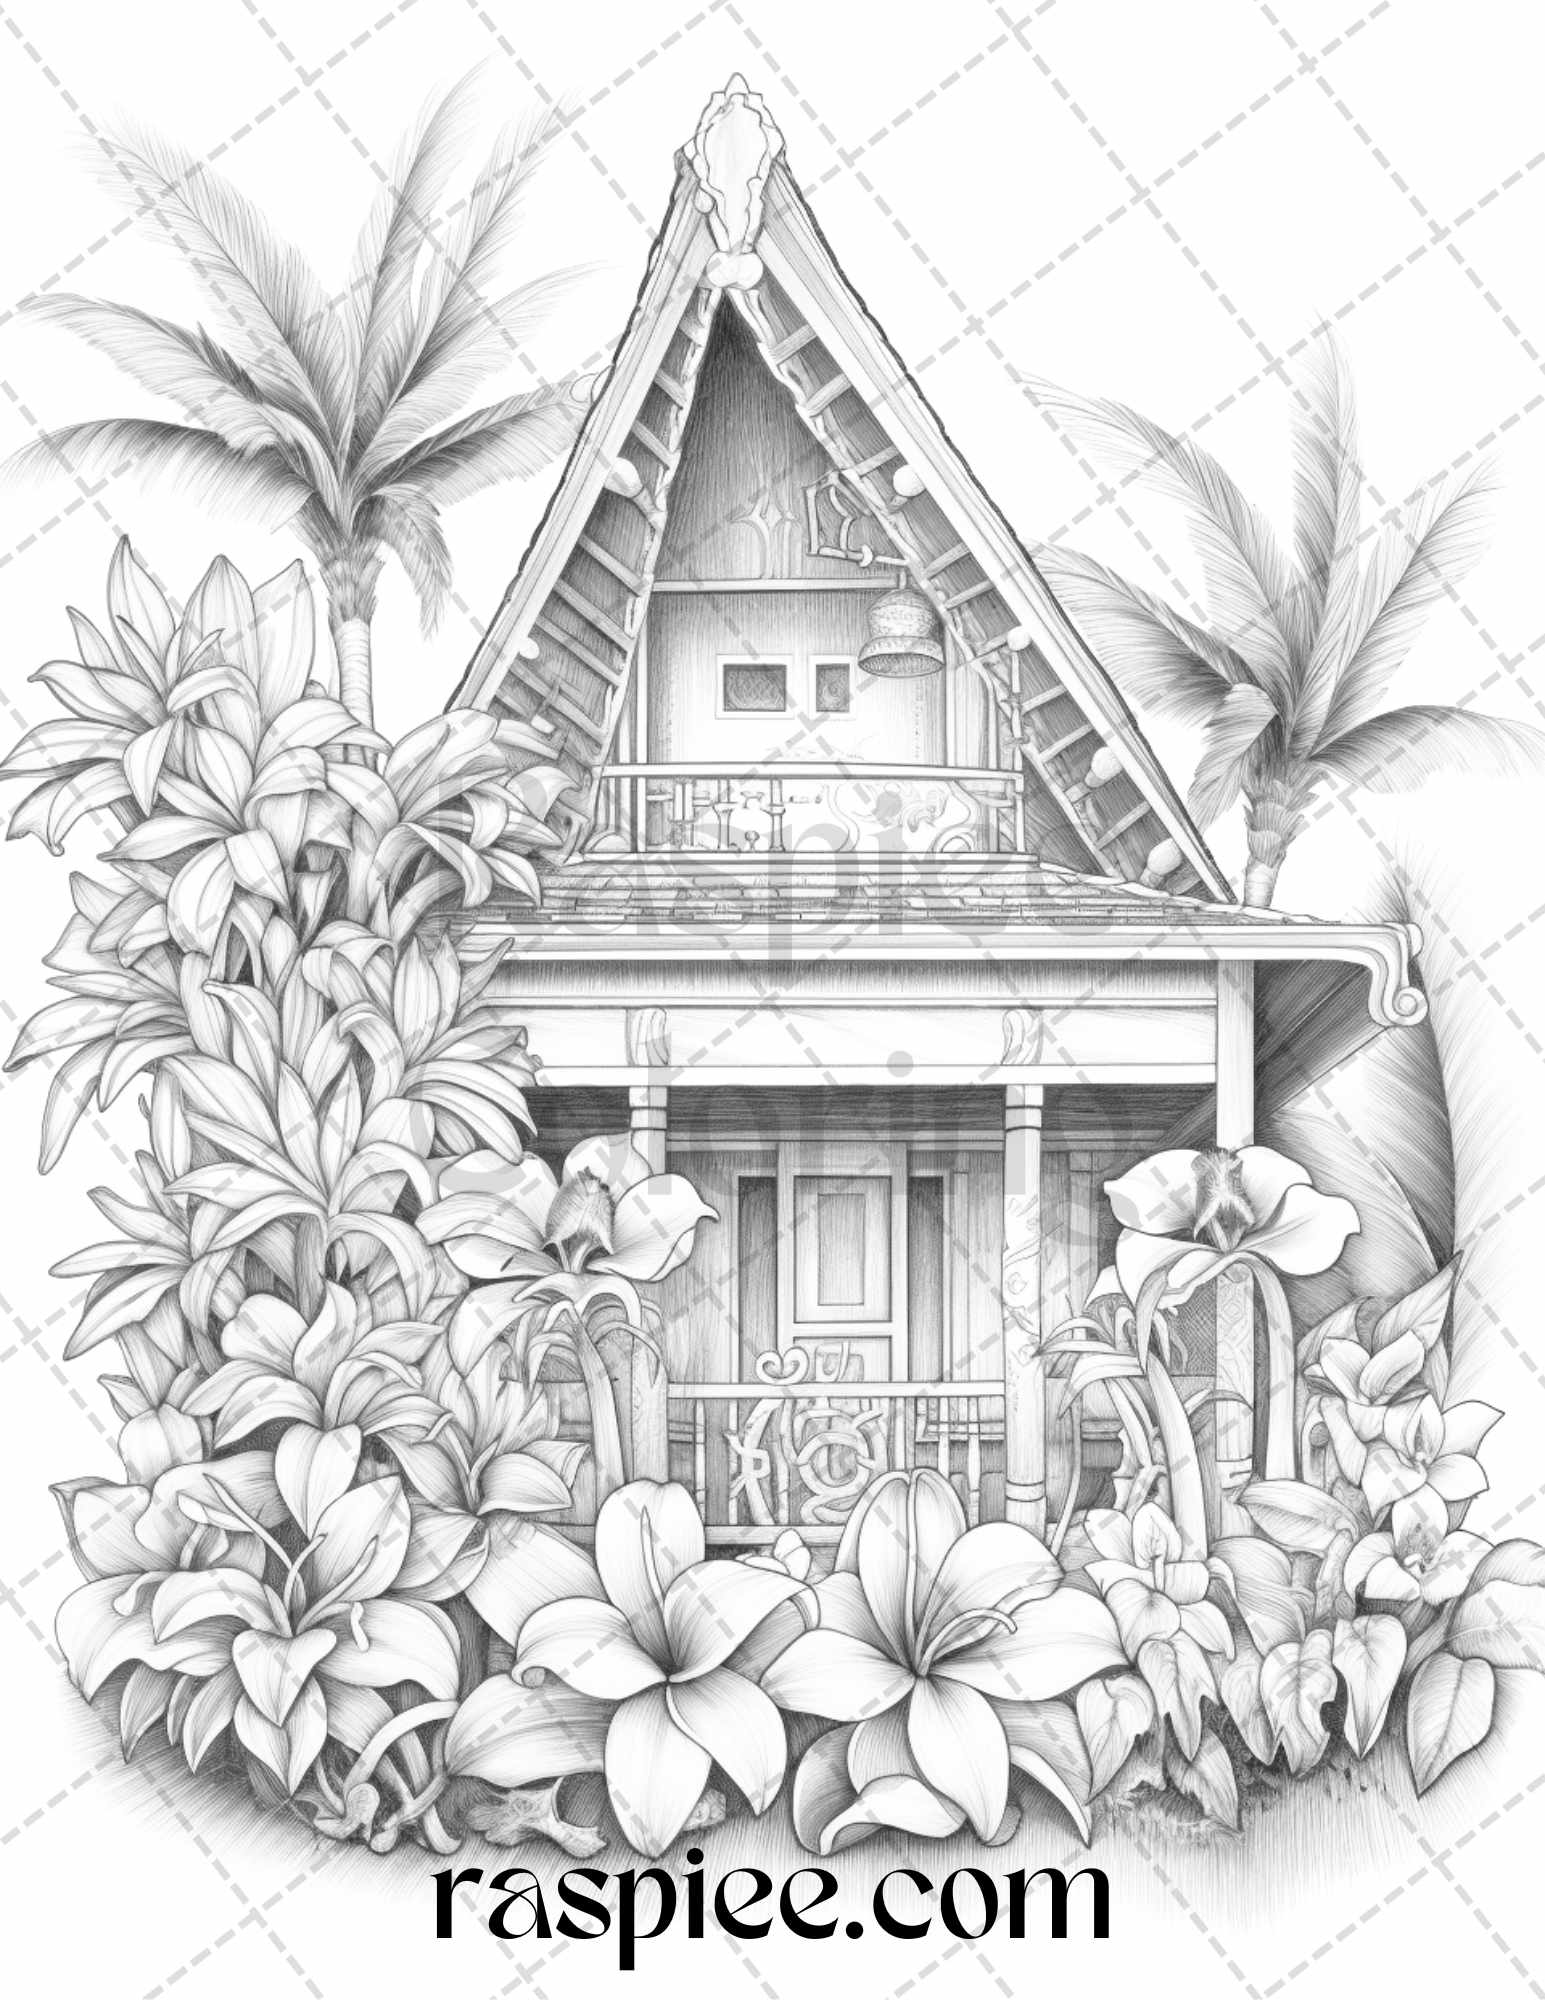 Hawaii tiki houses grayscale coloring pages printable for adults p â coloring